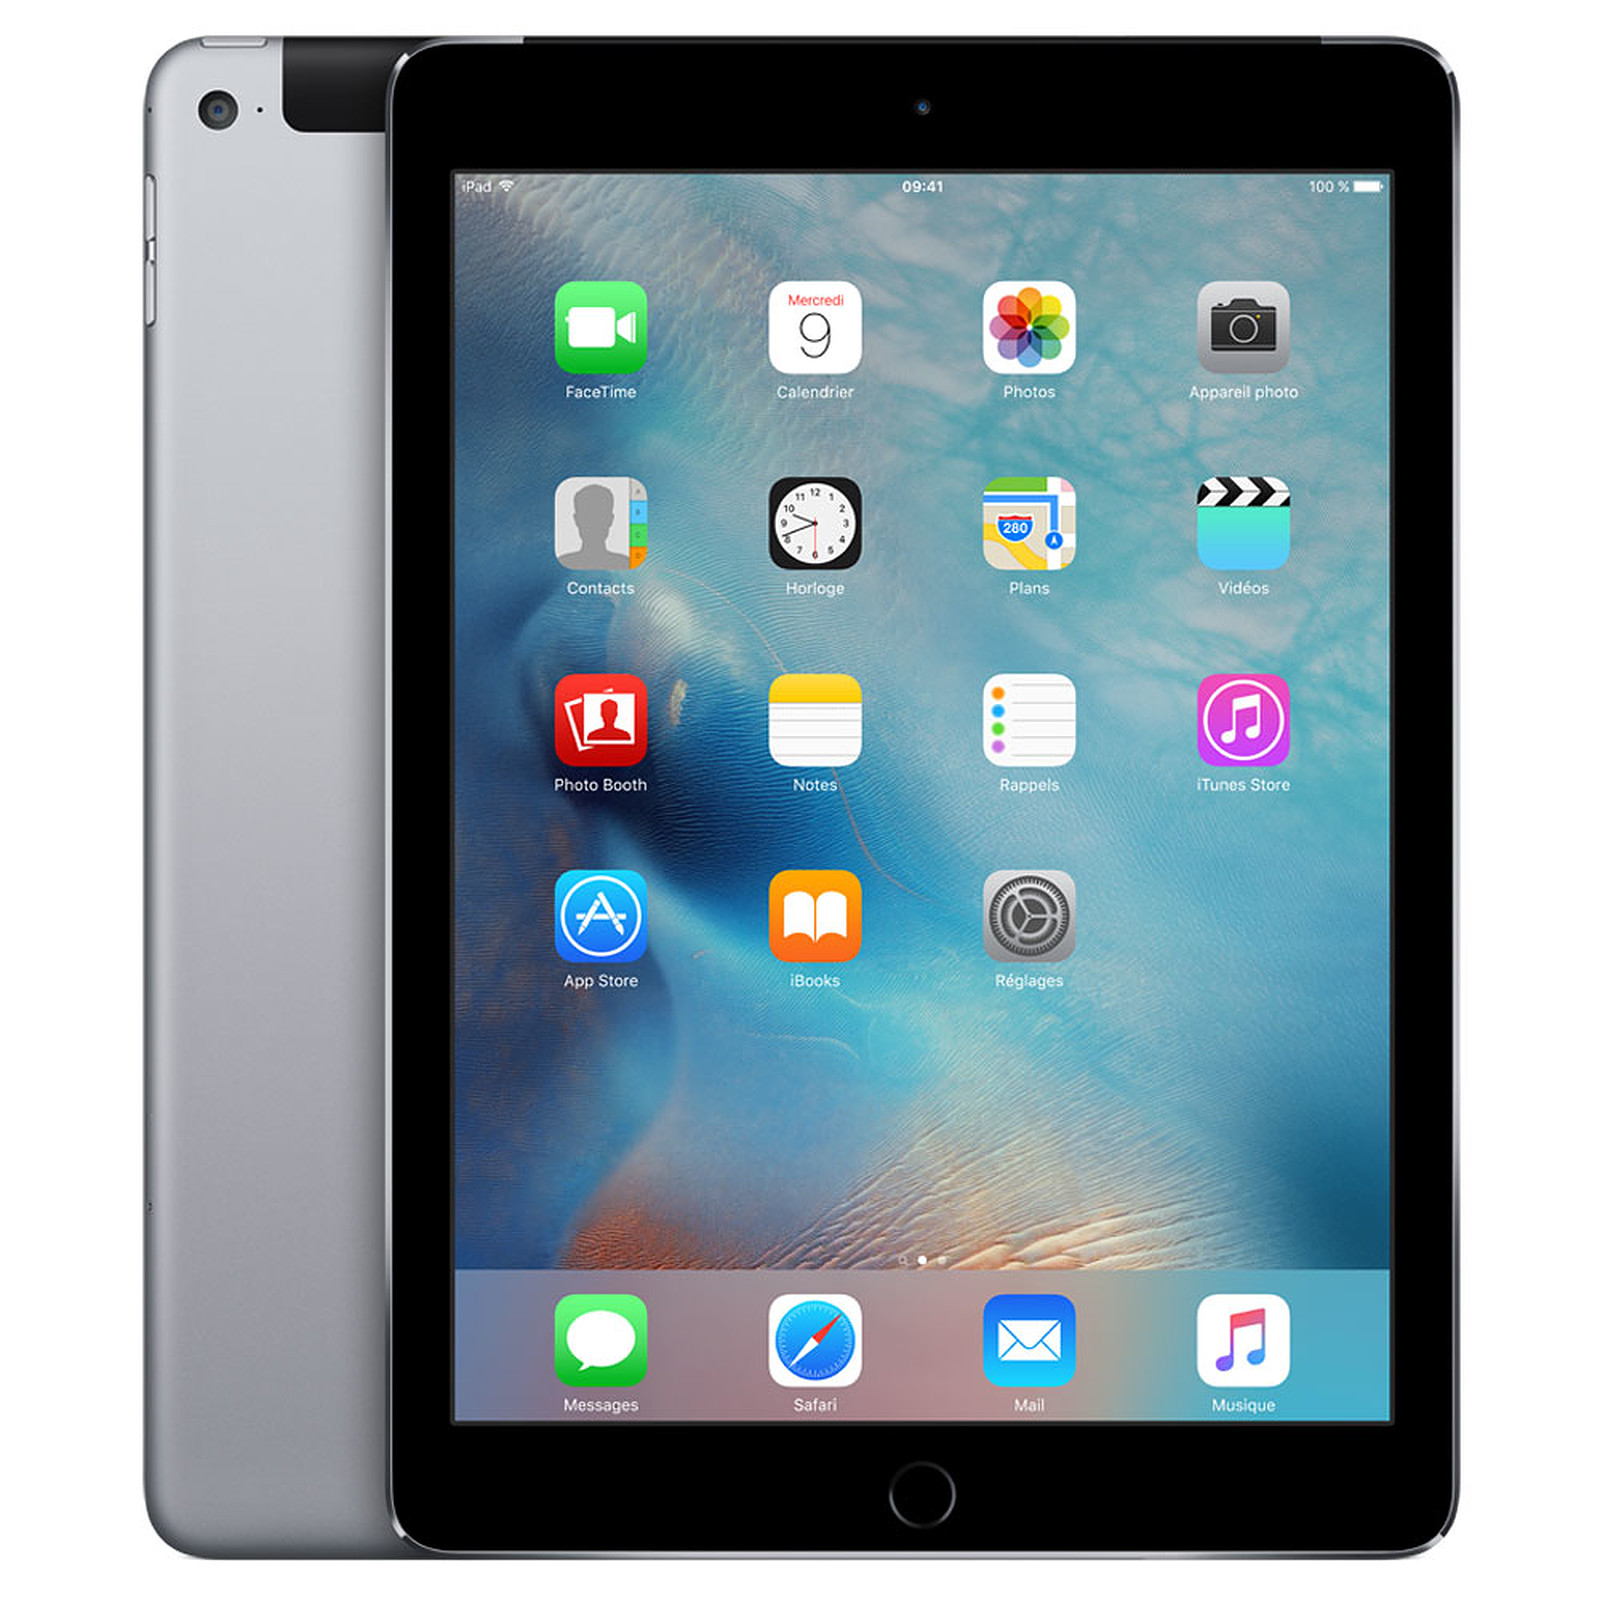 Apple iPad Air 2 128 Go Wi-Fi + Cellular Gris sideral · Reconditionne - Tablette tactile Apple